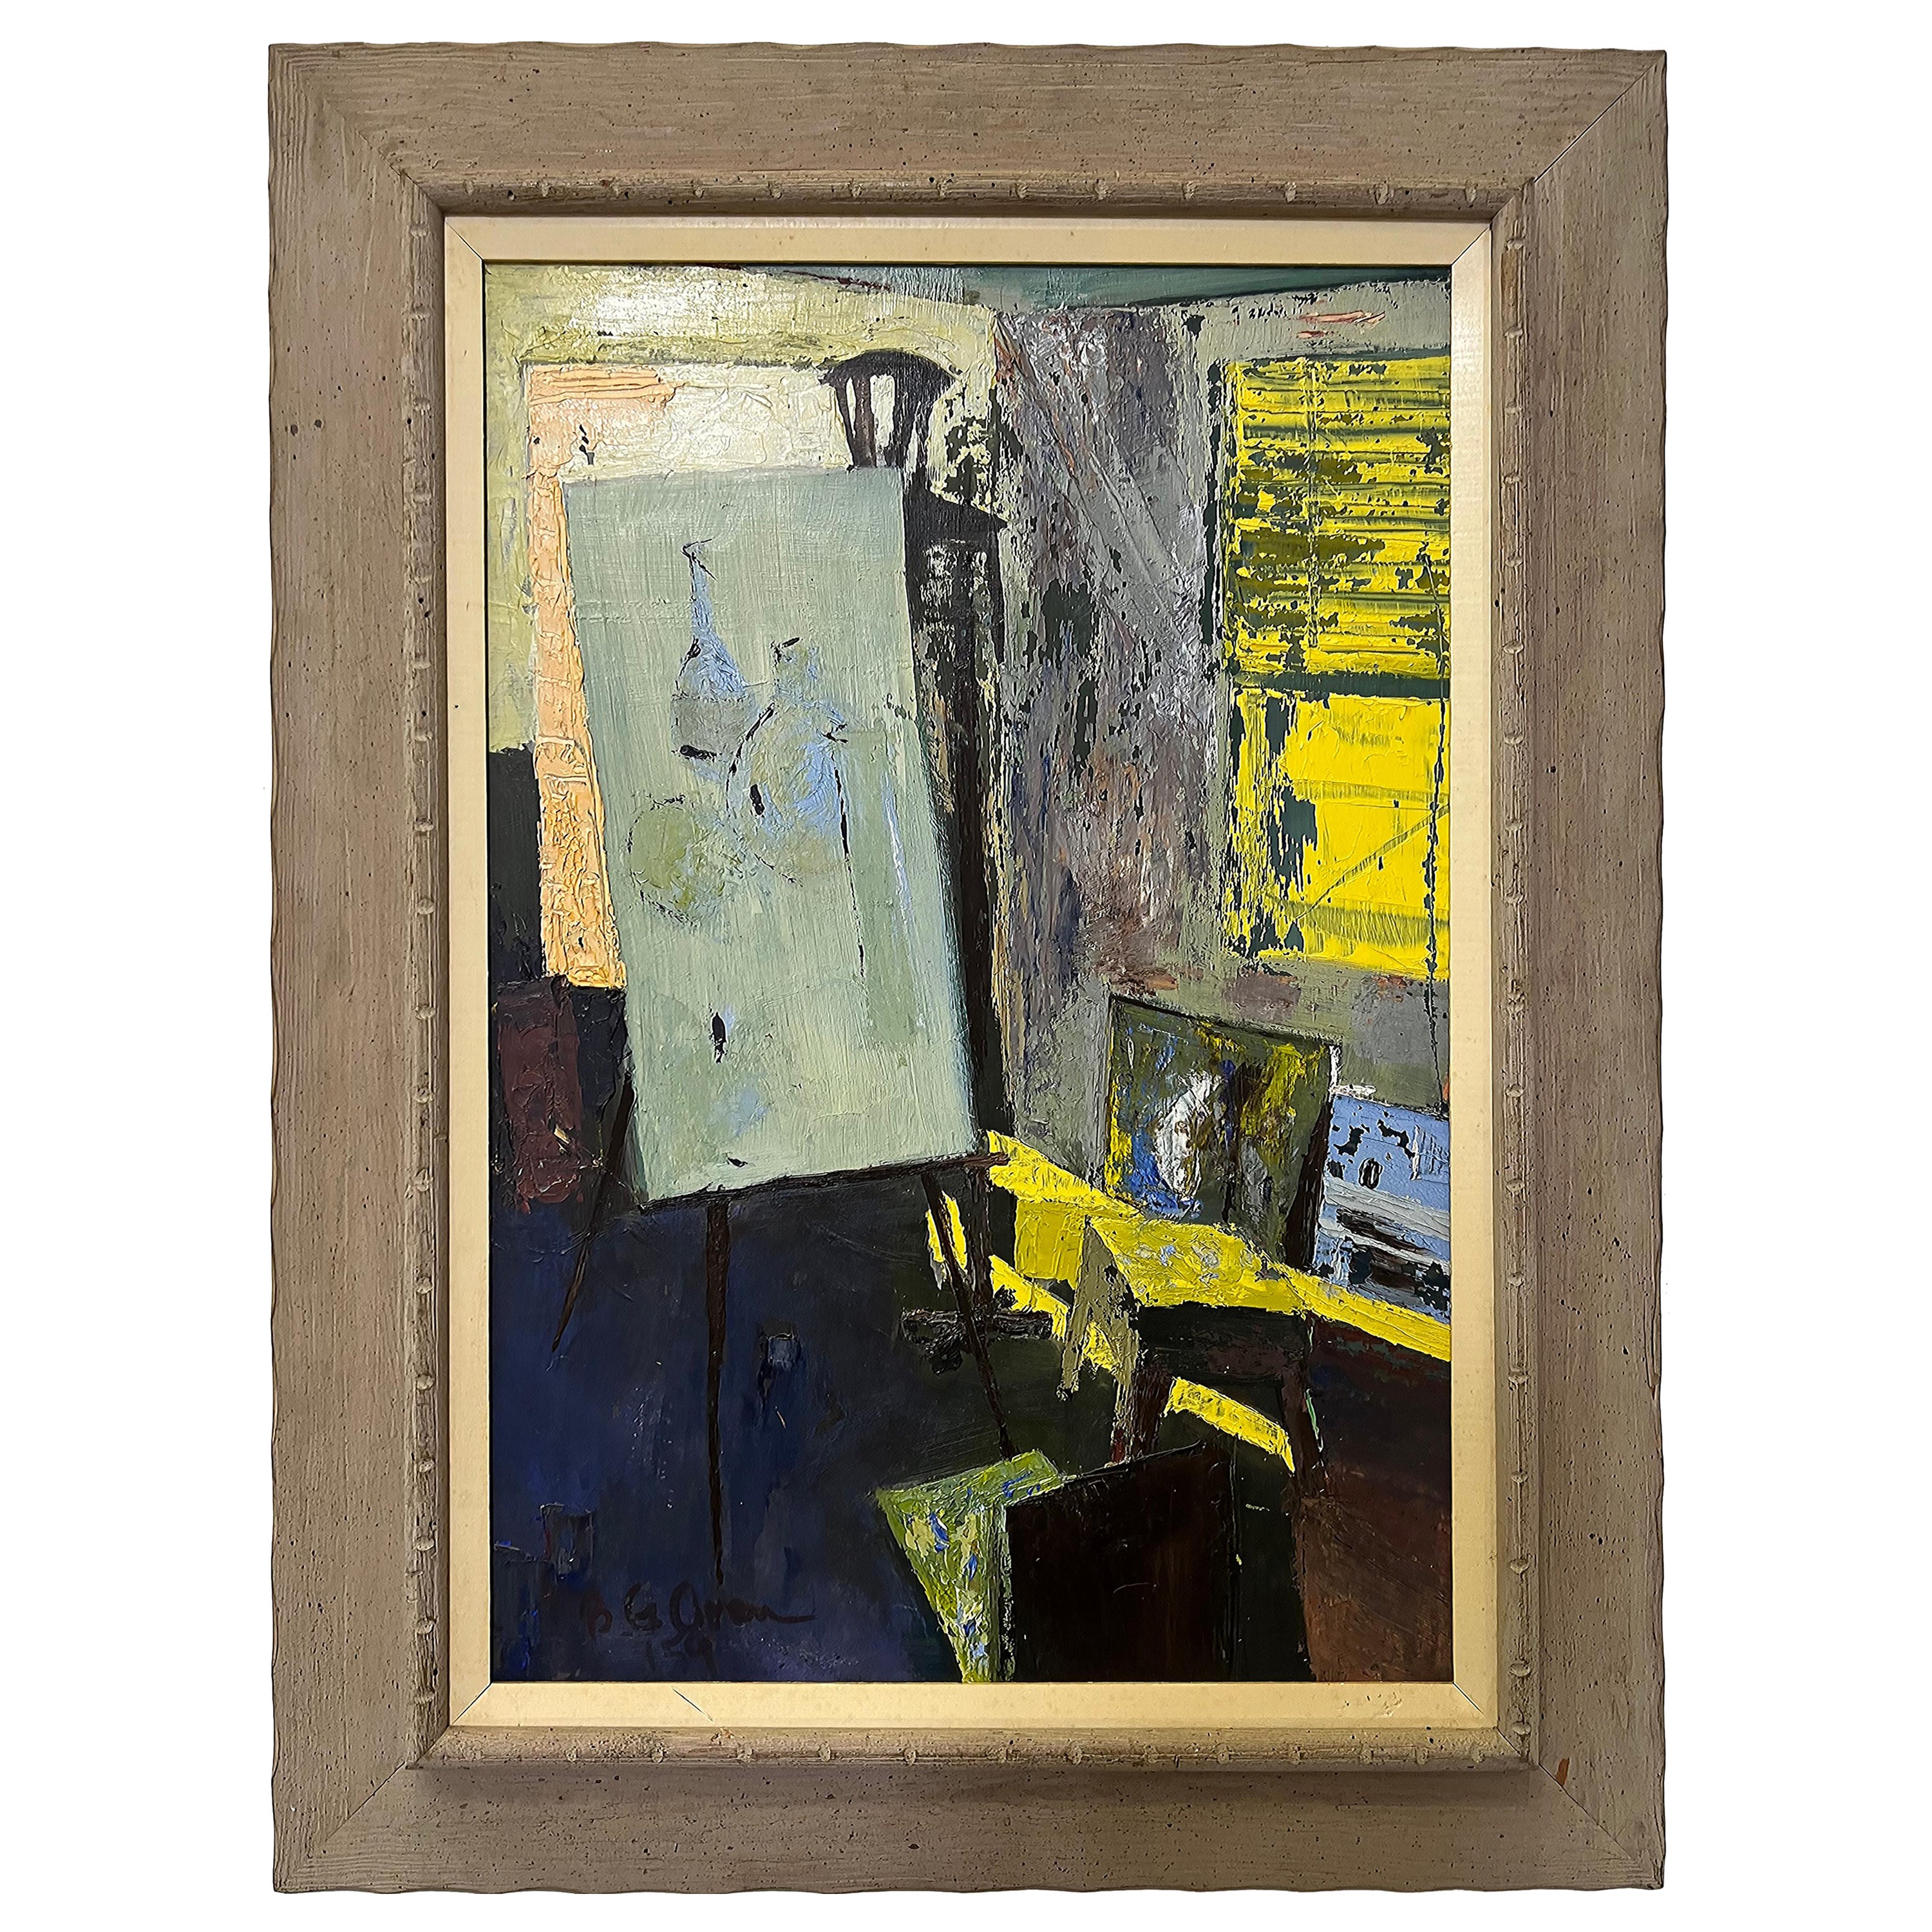 1959 B. G. Orem Mid-century Modern Abstract Oil Painting of His Studio